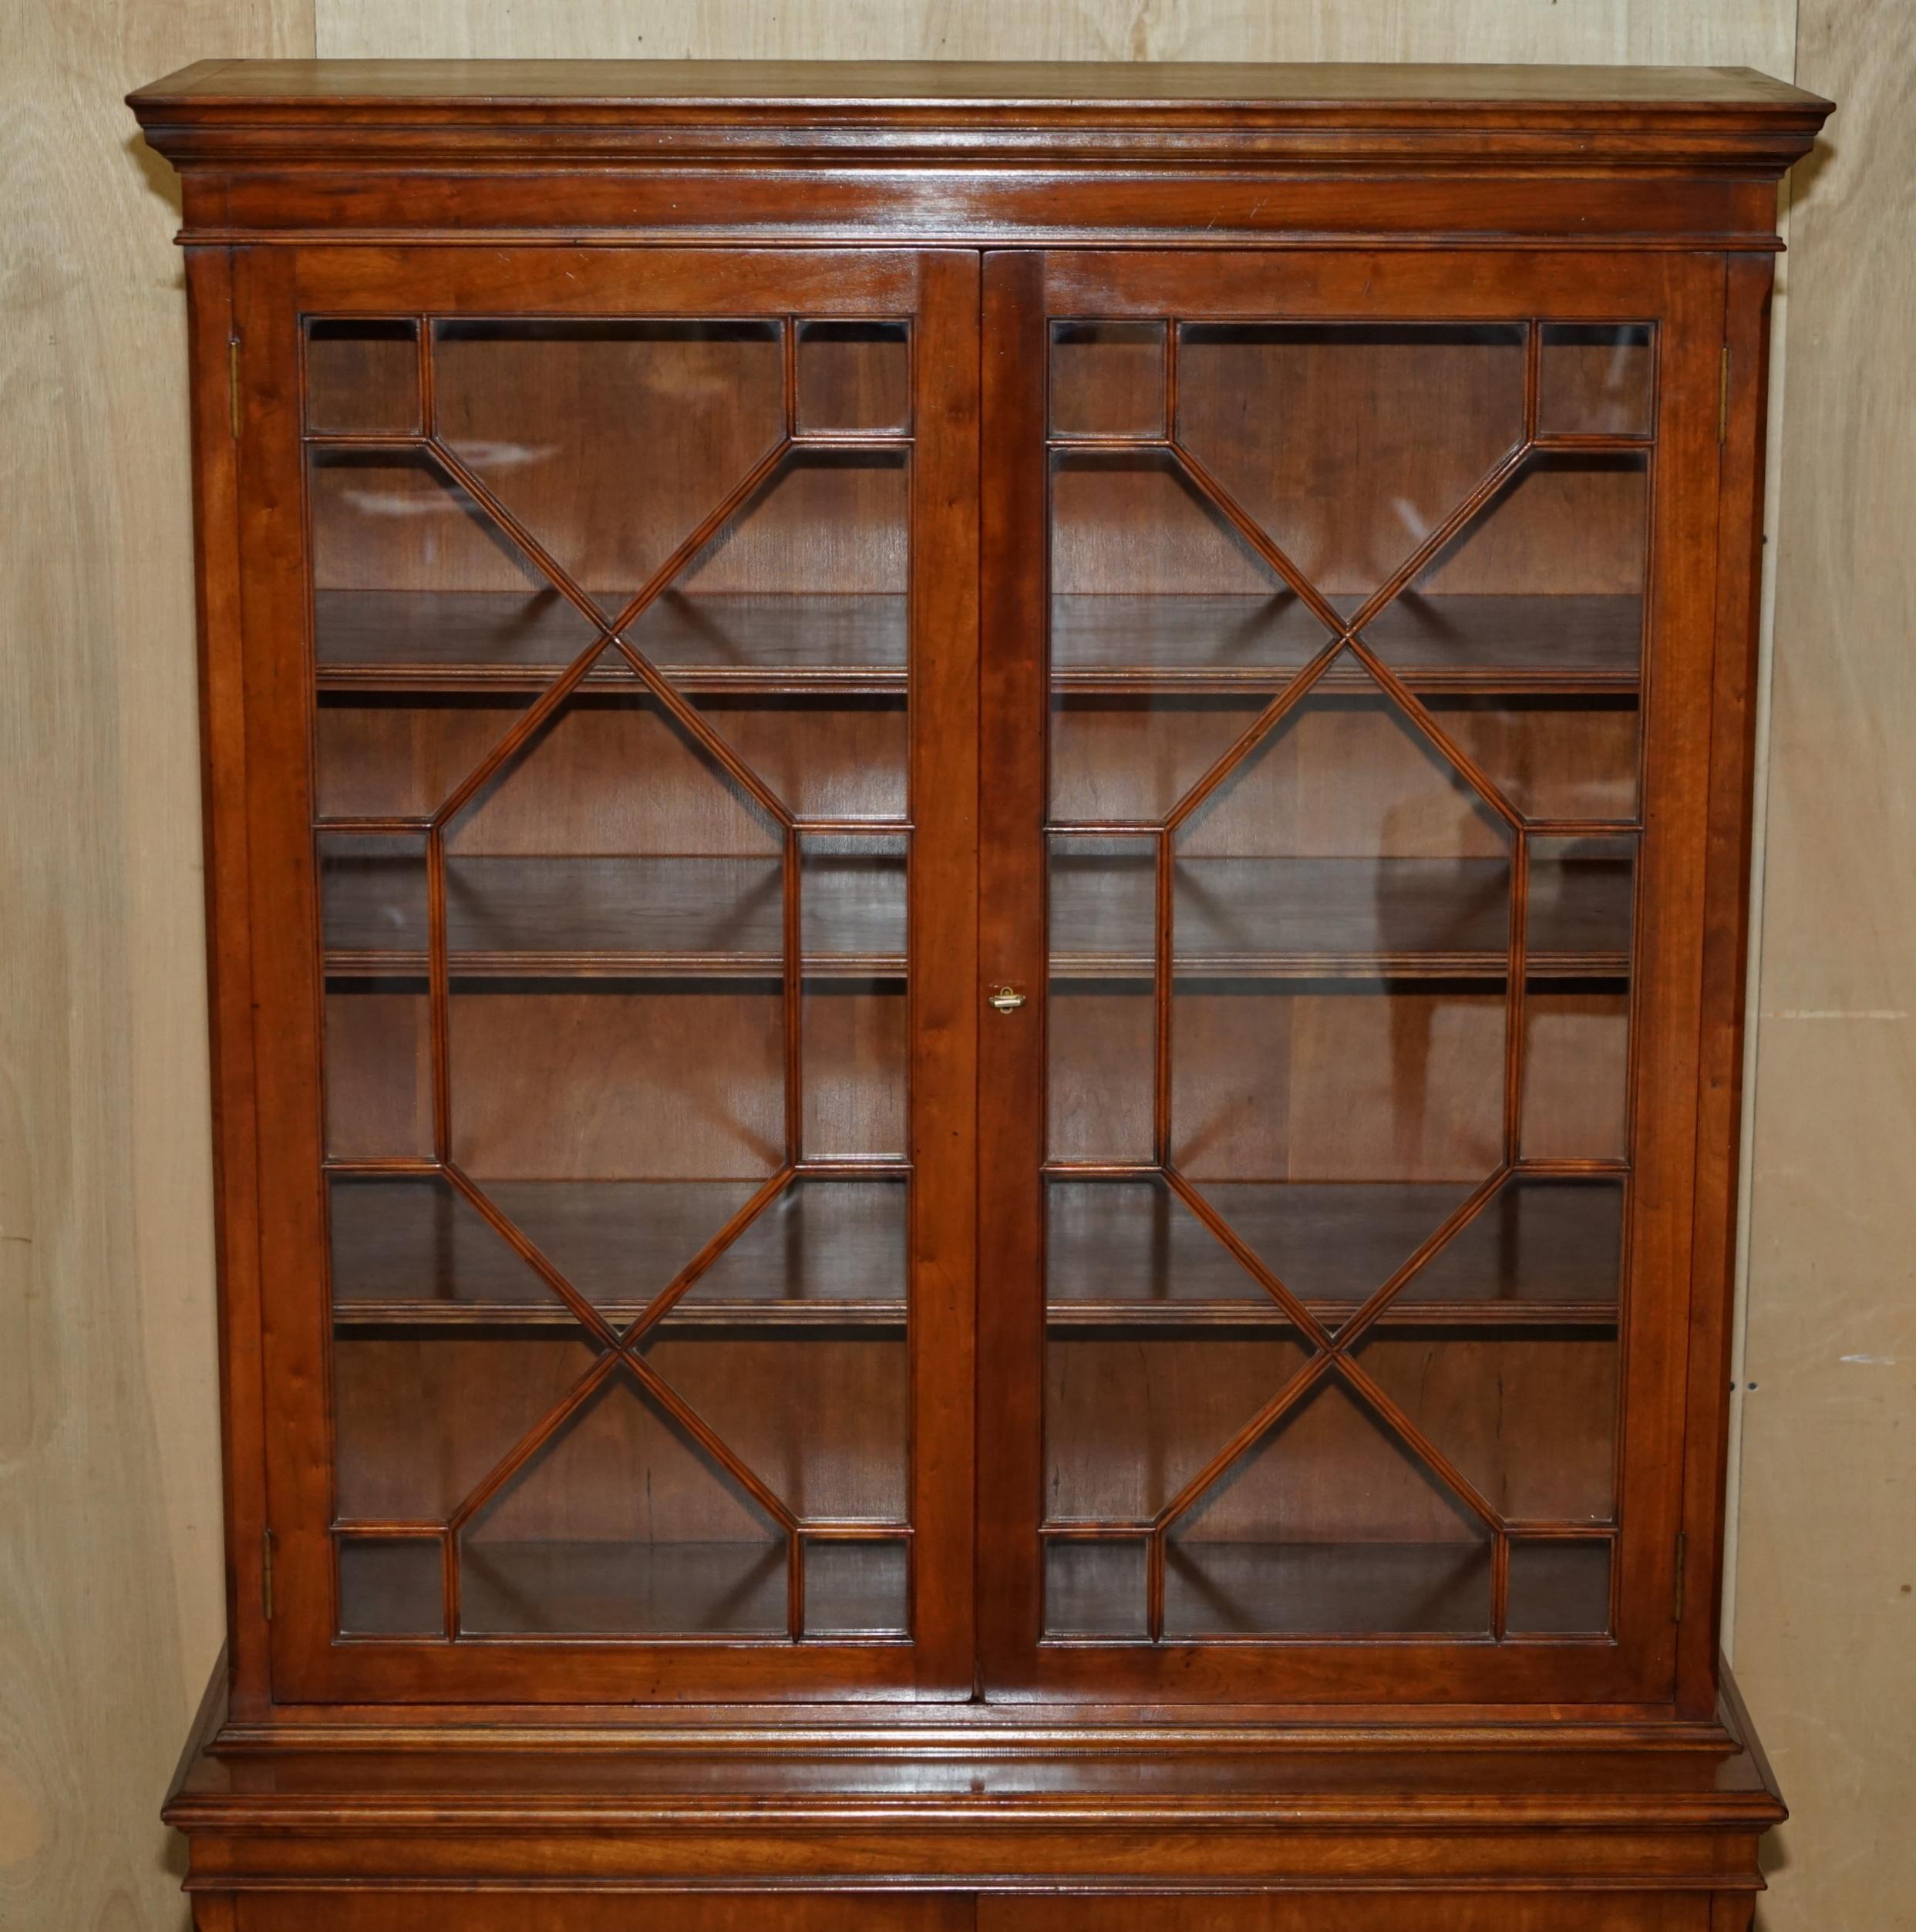 Country HARRODS LONDON REH KENNEDY ASTRAL GLAZED LiBRARY BOOKCASE CUPBOARD STORAGE UNIT For Sale